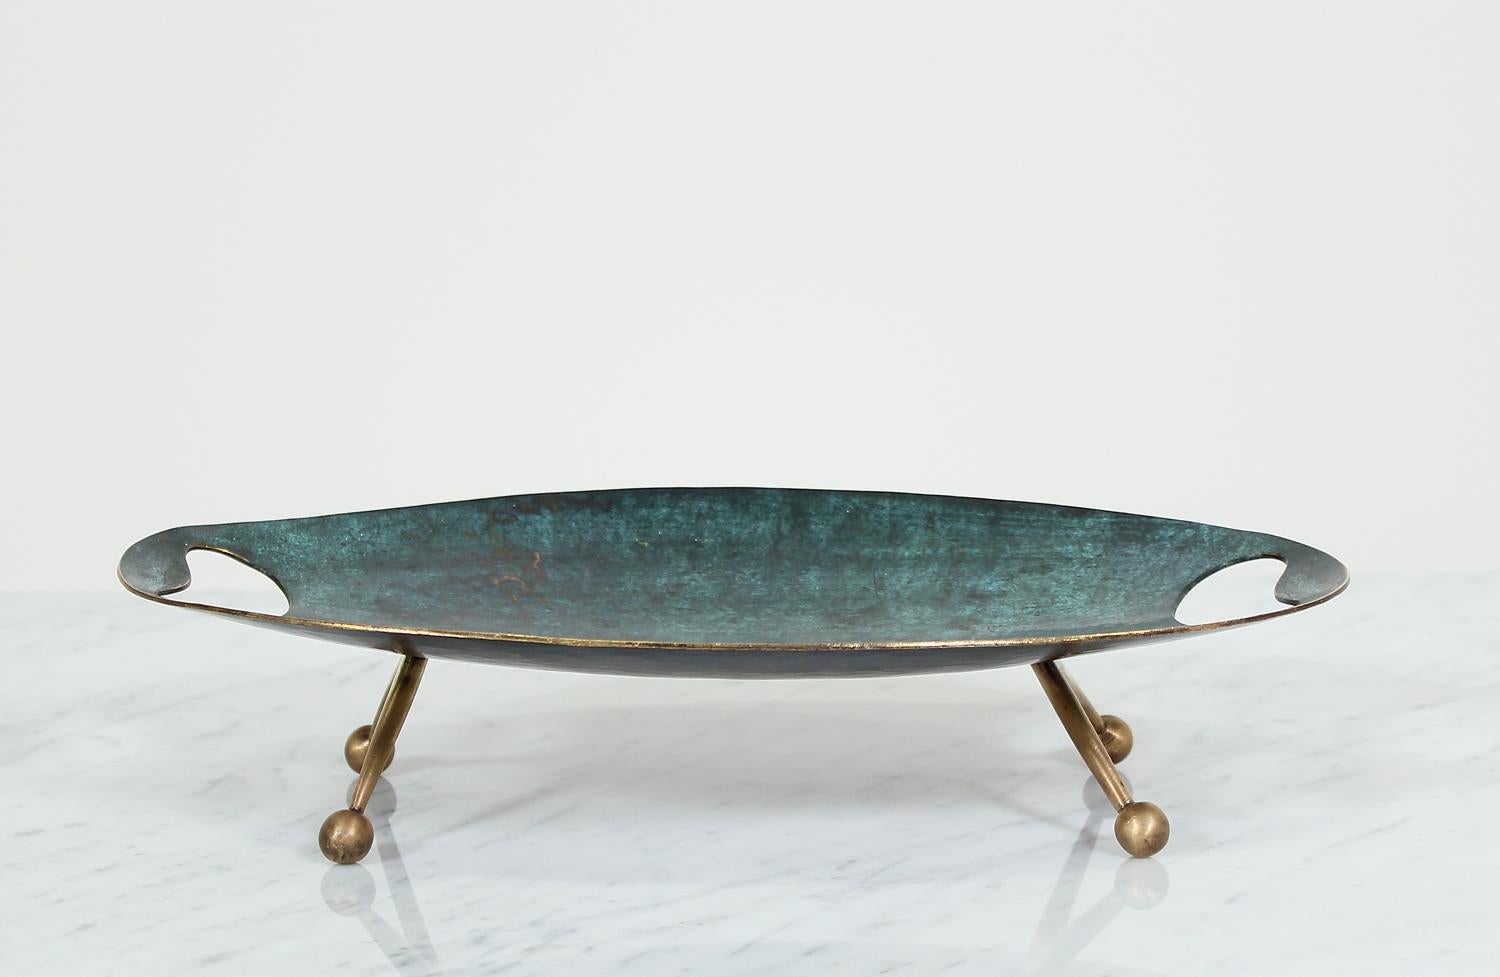 Mid-Century tray designed by Maurice Ascalon for Pal-Bell Co. in Israel circa 1950’s. This stunning tray features Ascalons’ signature verdigris patina and sits tall on four decorative legs comprised of bronze. This beautiful collectors item